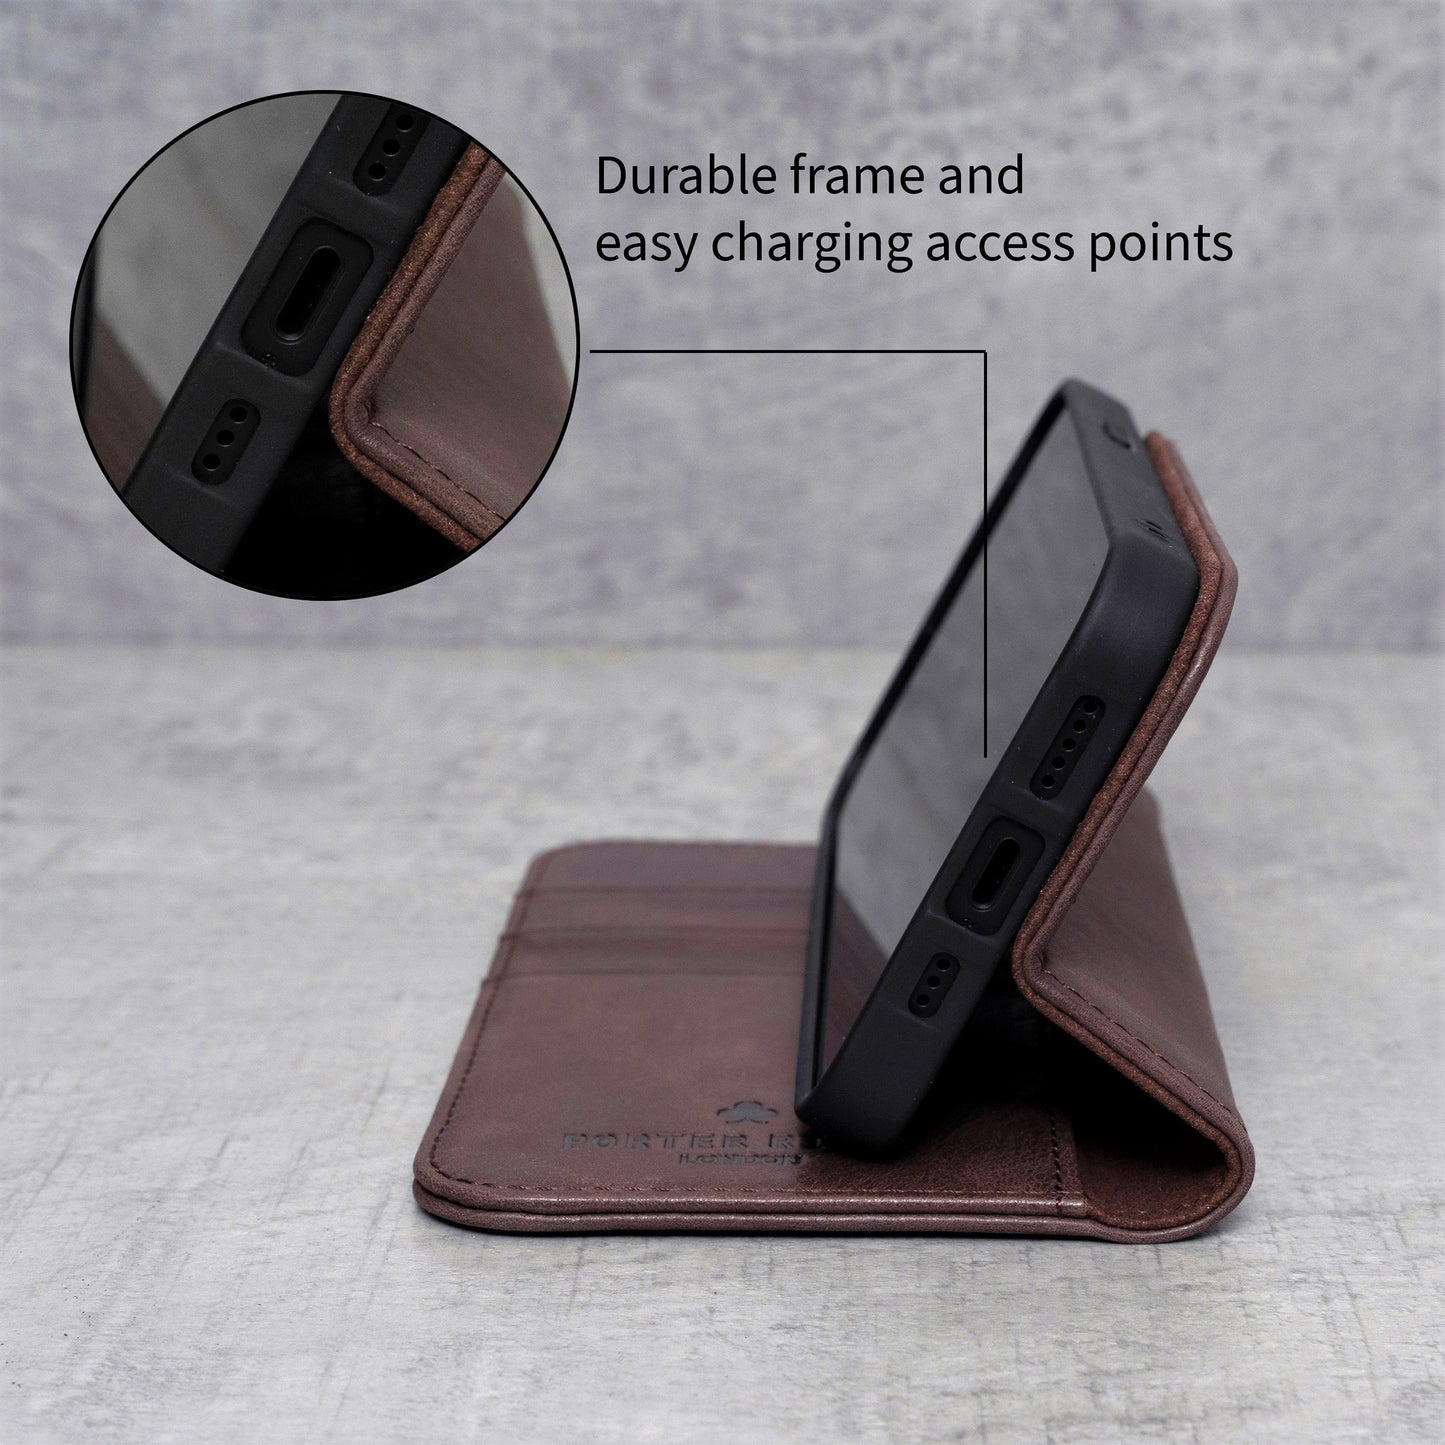 Samsung Galaxy S20 Plus Leather Case. Premium Slim Genuine Leather Stand Case/Cover/Wallet (Chocolate Brown)